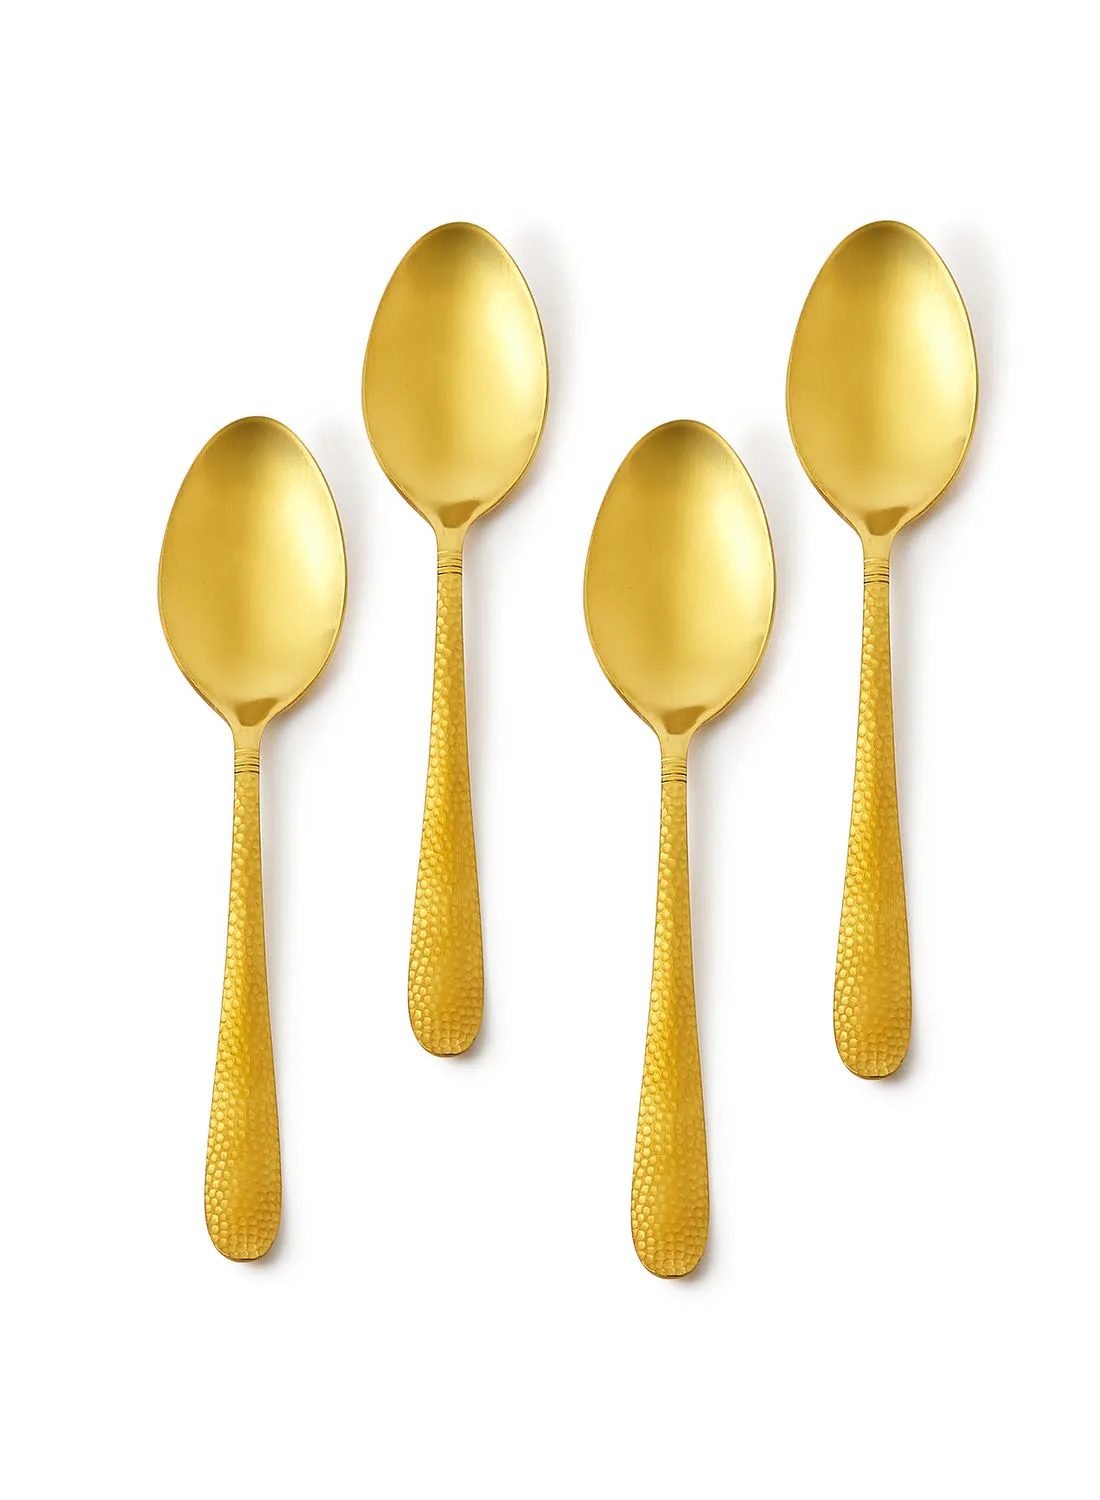 Amal 4 Piece Tablespoons Set - Made Of Stainless Steel - Silverware Flatware - Spoons - Spoon Set - Table Spoons - Serves 4 - Design Gold Aster